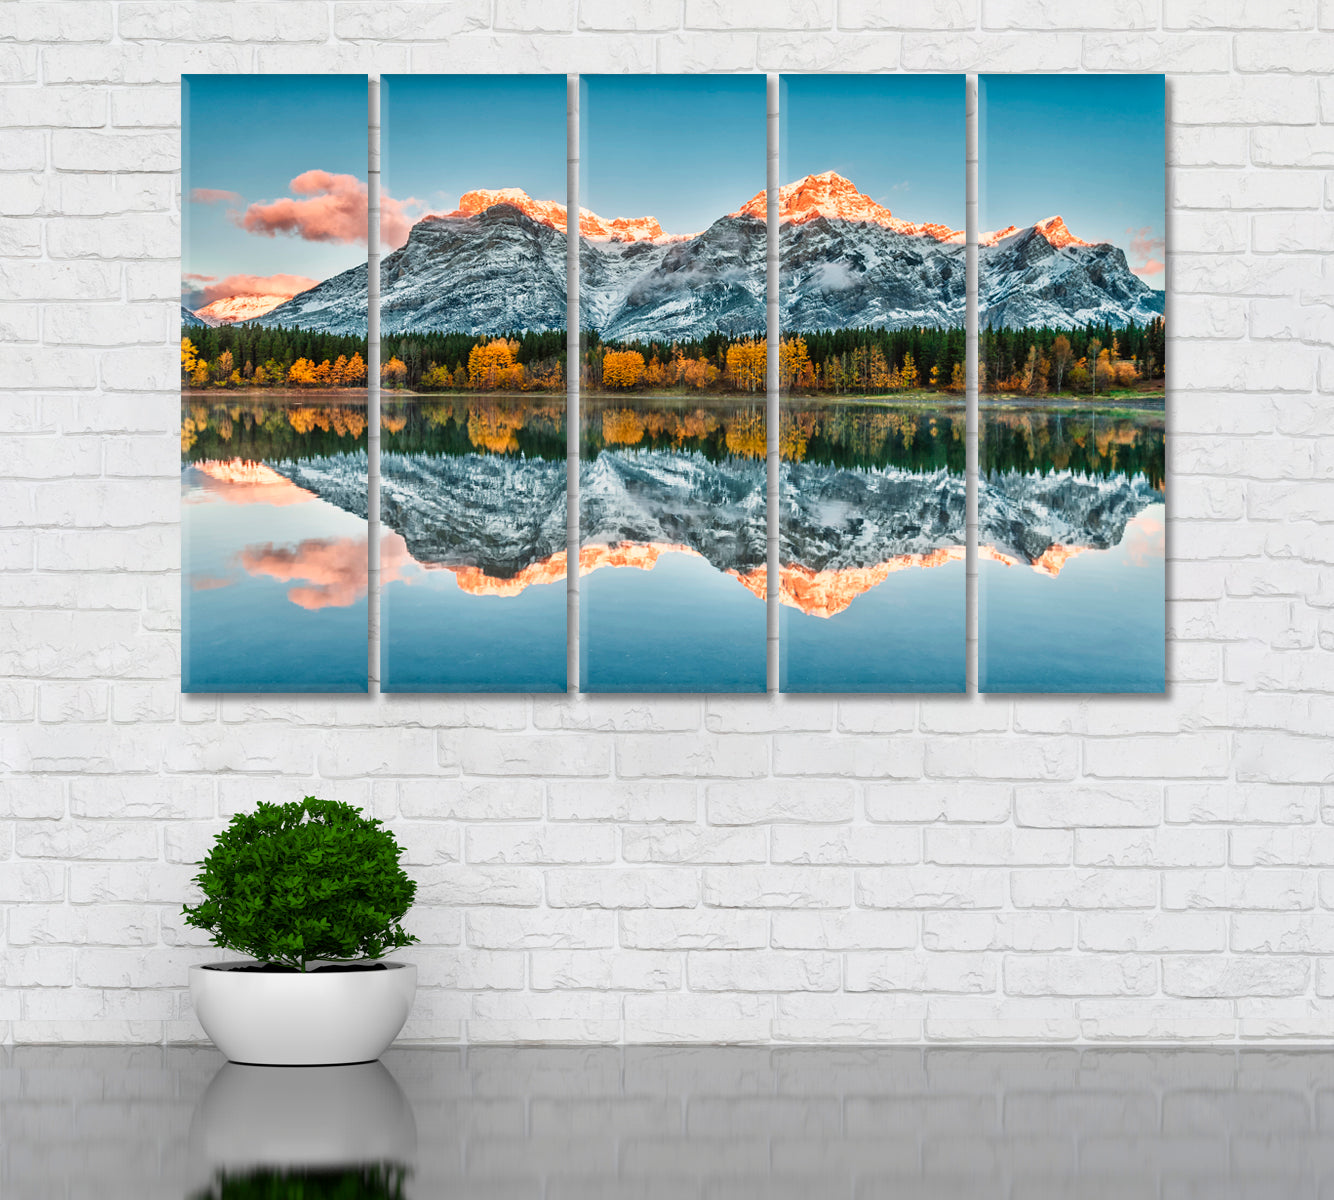 Mount Kidd Reflected In Wedge Pond Alberta Canada Canvas Print ArtLexy 5 Panels 36"x24" inches 